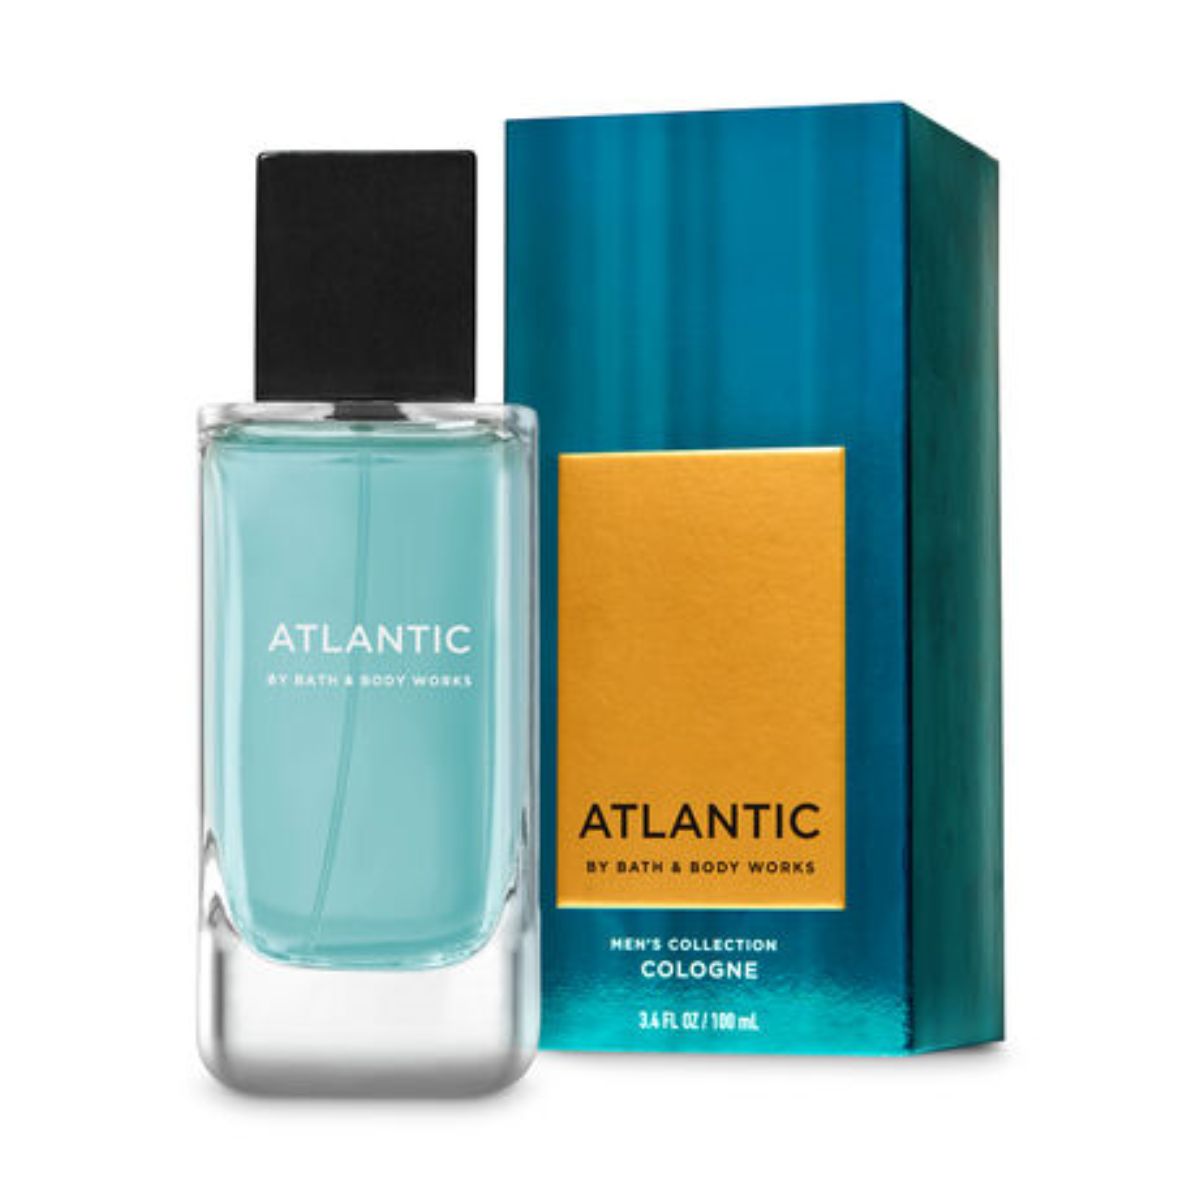 Atlantic Bath and Body Works cologne - a new fragrance for men 2020